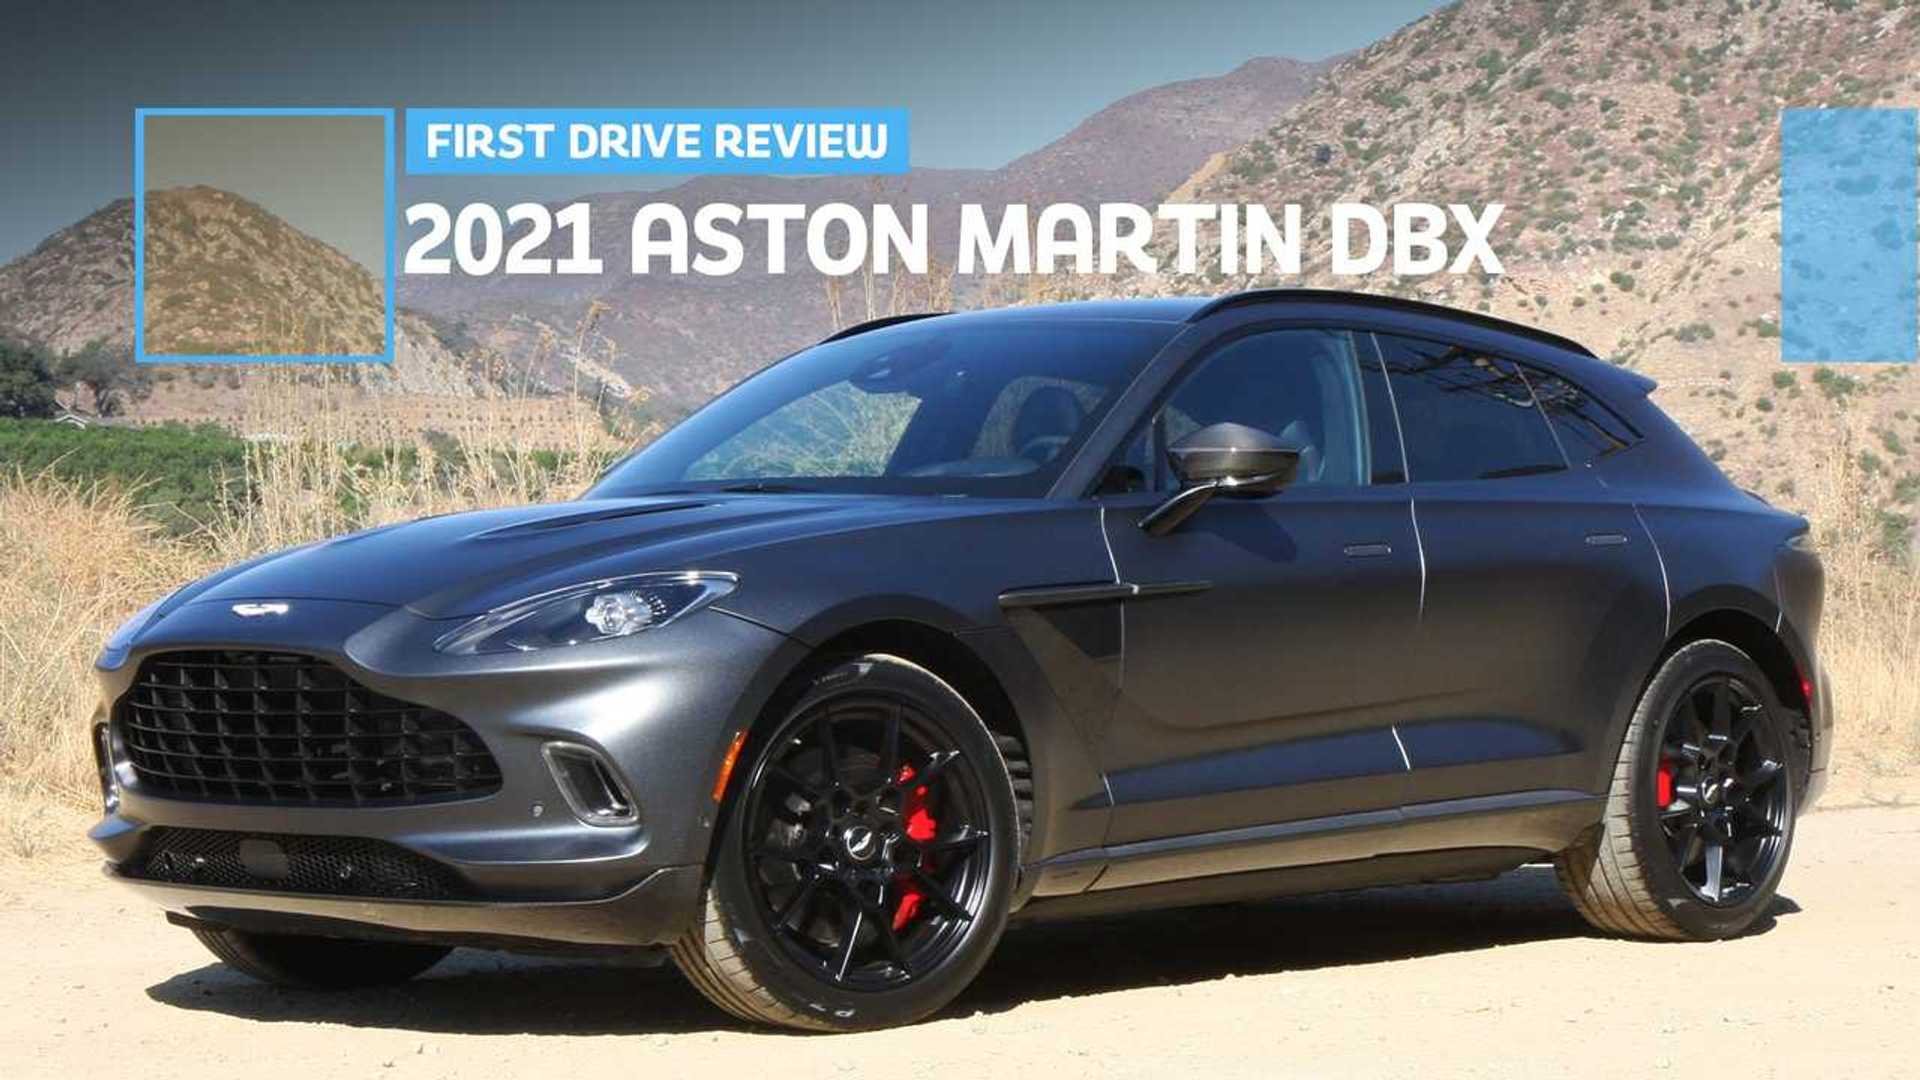 2021 Aston Martin DBX First Drive Review: Doing It All In Style